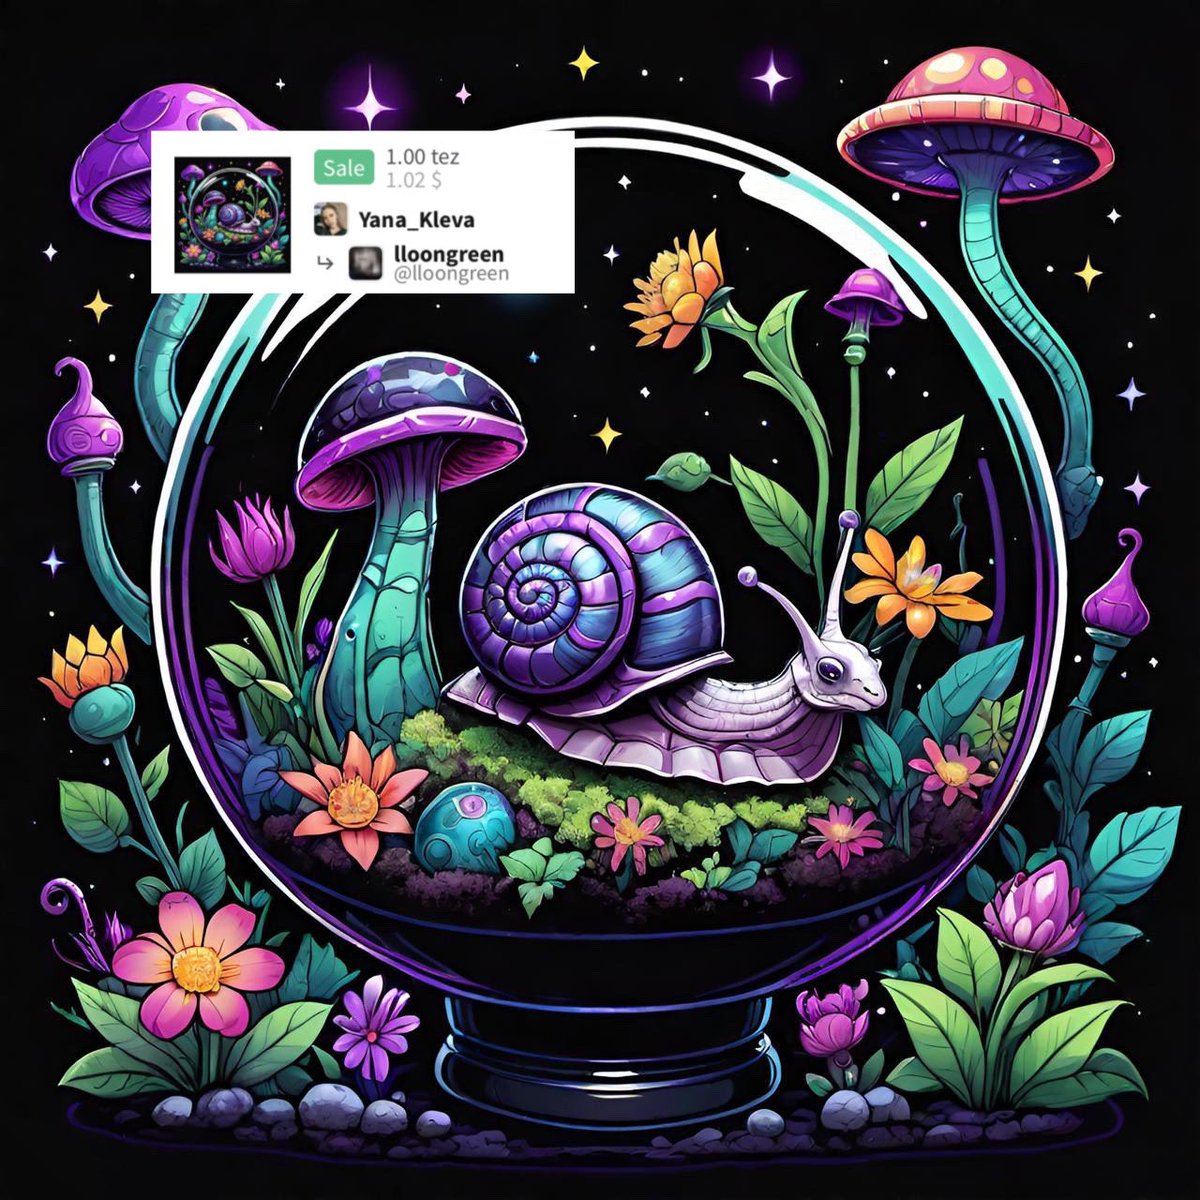 The purple snail was minted by dear @lloongreenn 🥳💫
Thank you for your love for the 'Magical space' collection 💘💘💘
Hugs 🤗 

#TezosArts #tezoscommunity #tezoscollector